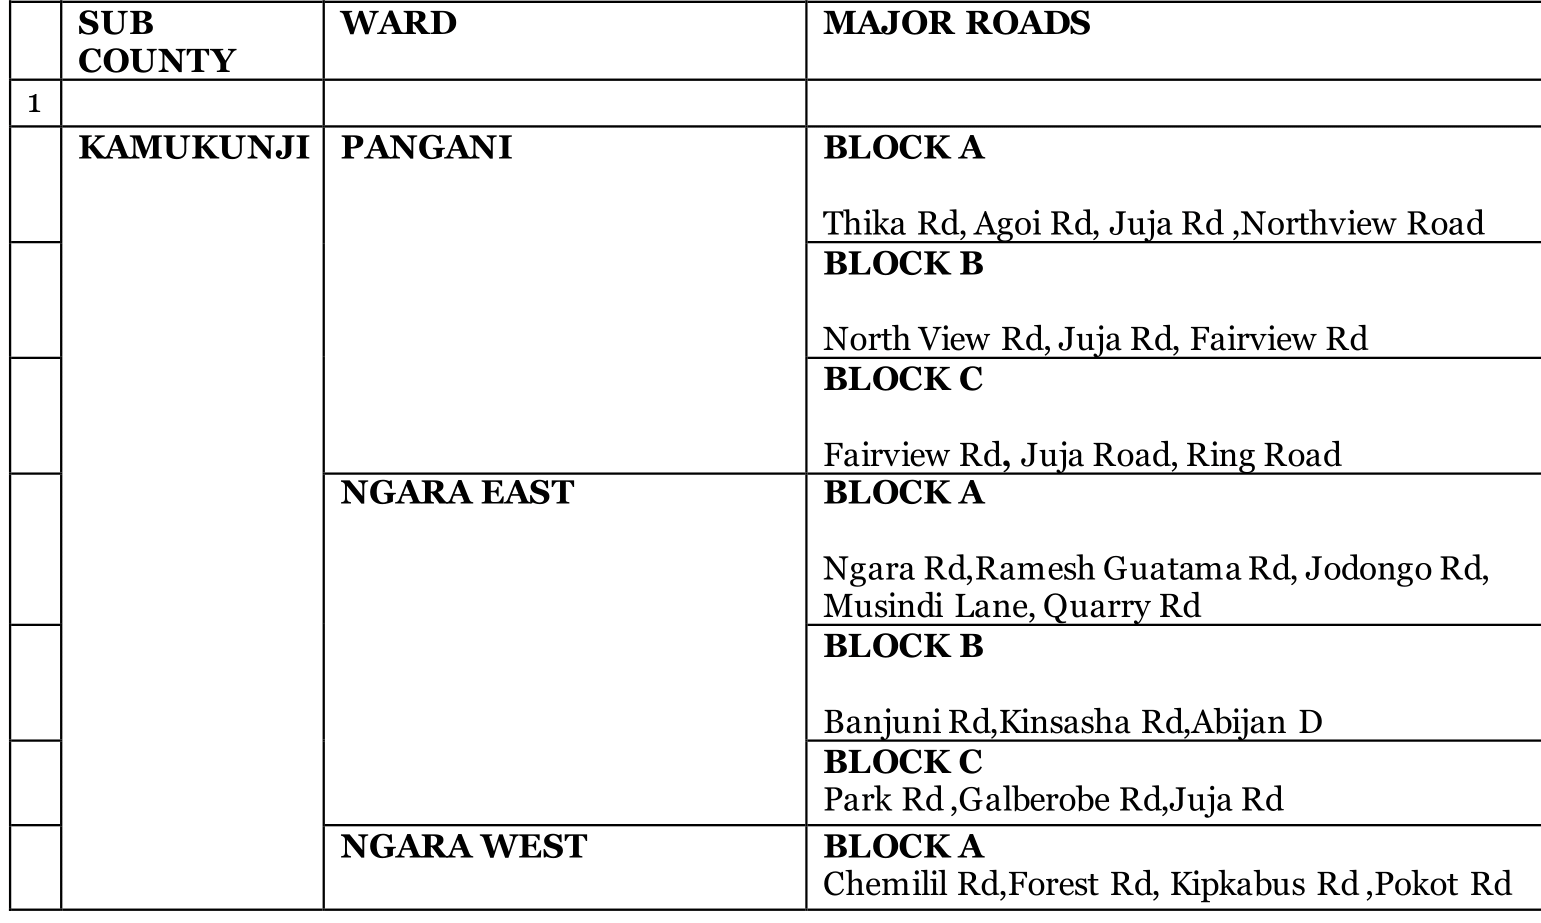 property Listing Localities Nairobi- Schedule-for-Data-Collection-Exercise-On-Rental-Properties-1